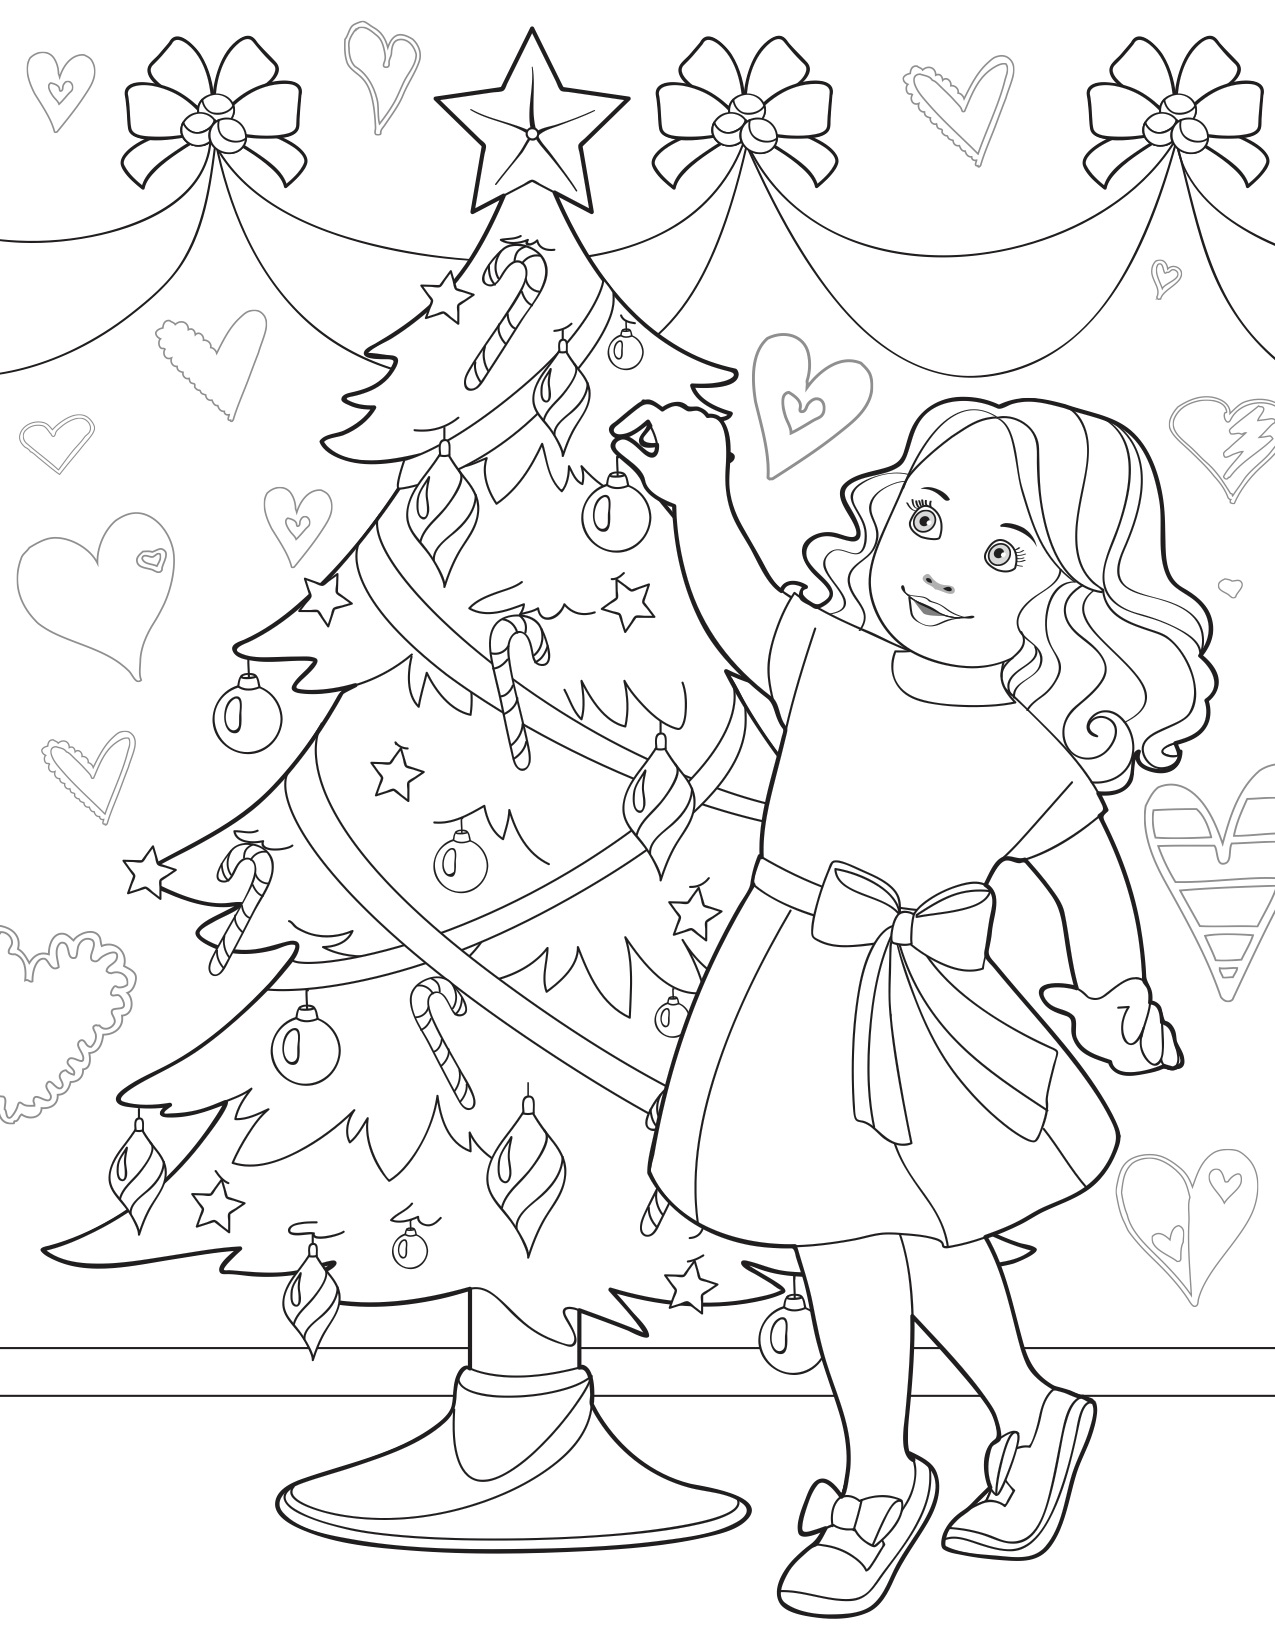 https://ourgeneration.com/wp-content/uploads/OurGeneration_ColoringSheet_Holidays.jpg